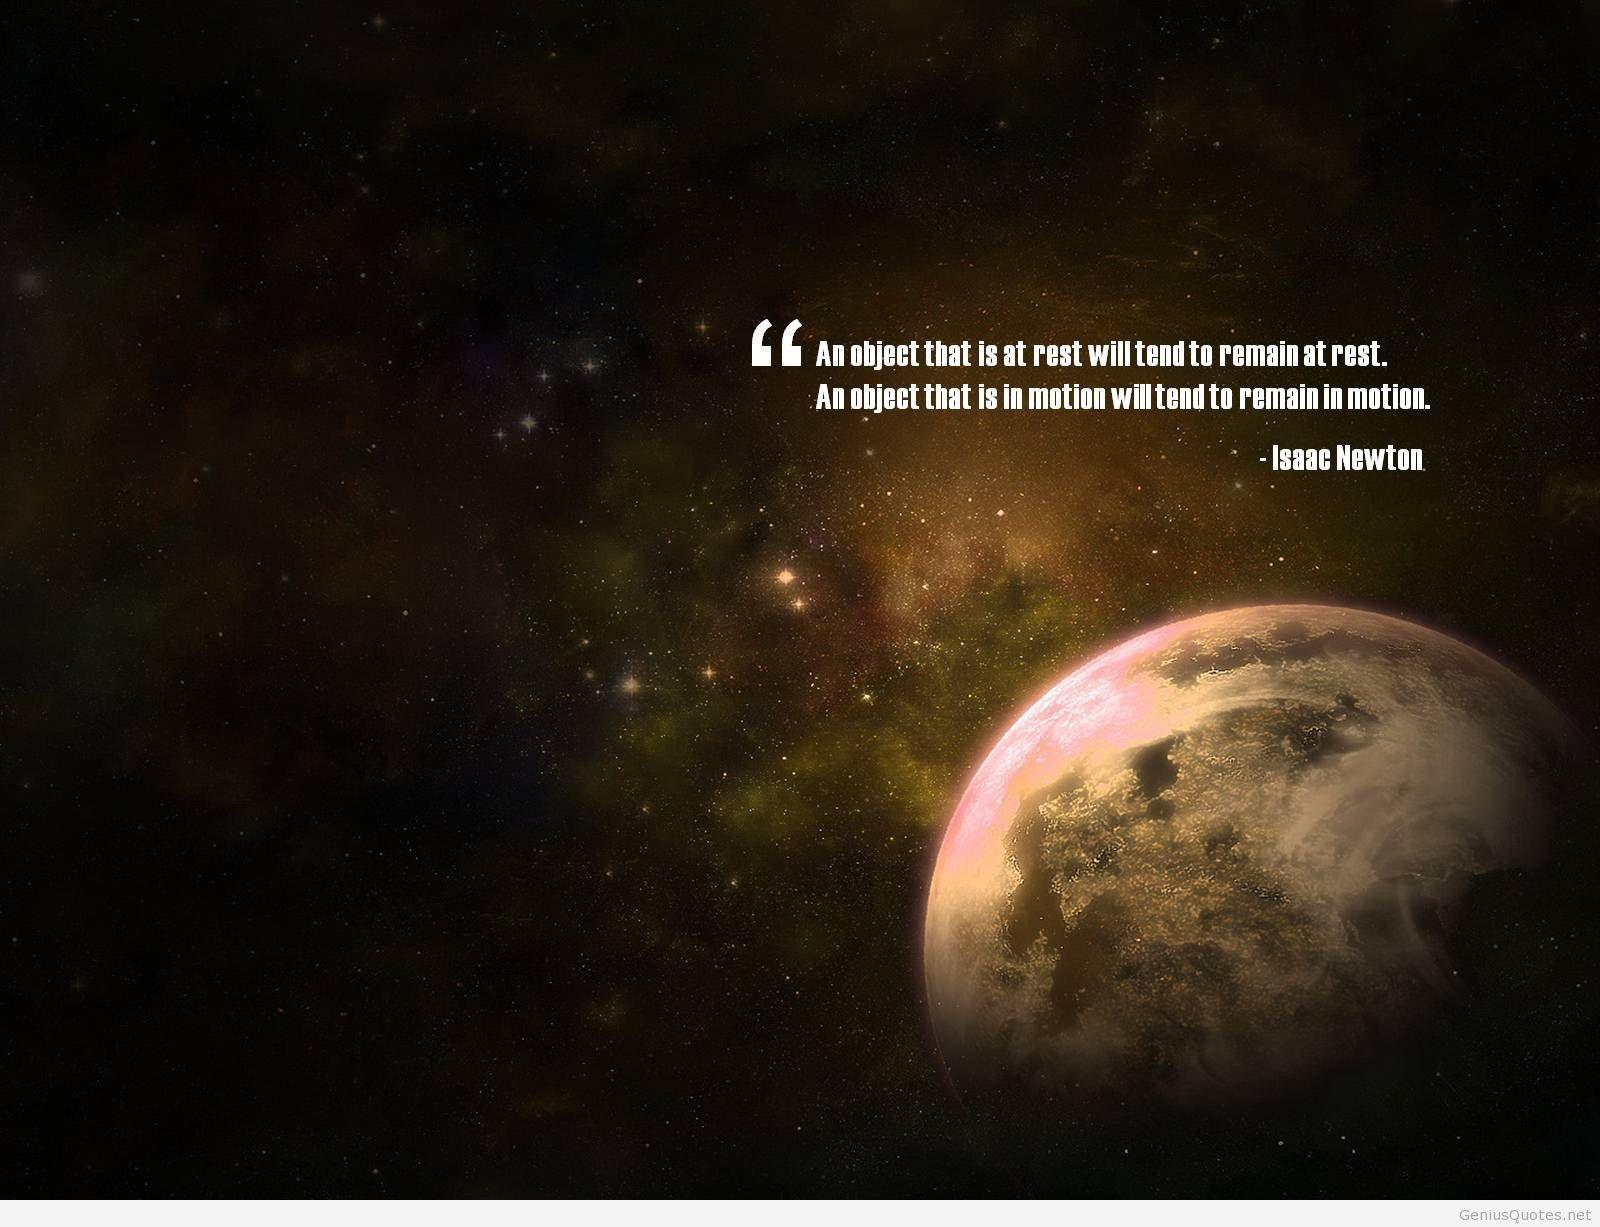 Isaac Newton inspirational quote 2014. Moon. Legend